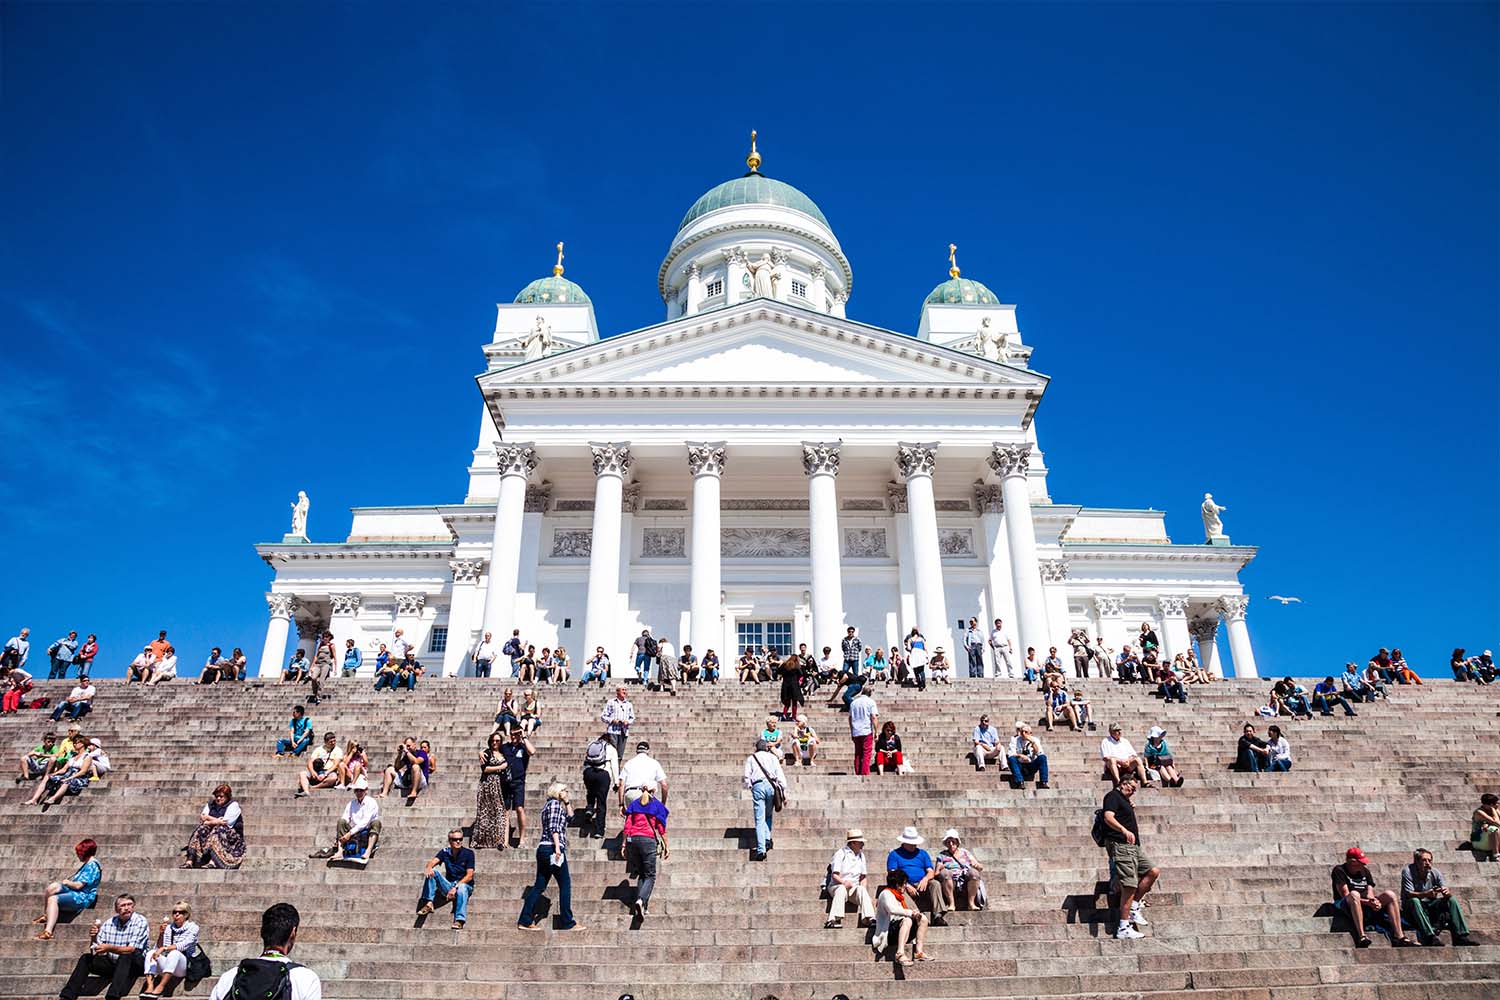 Helsinki Cathedral in the city center